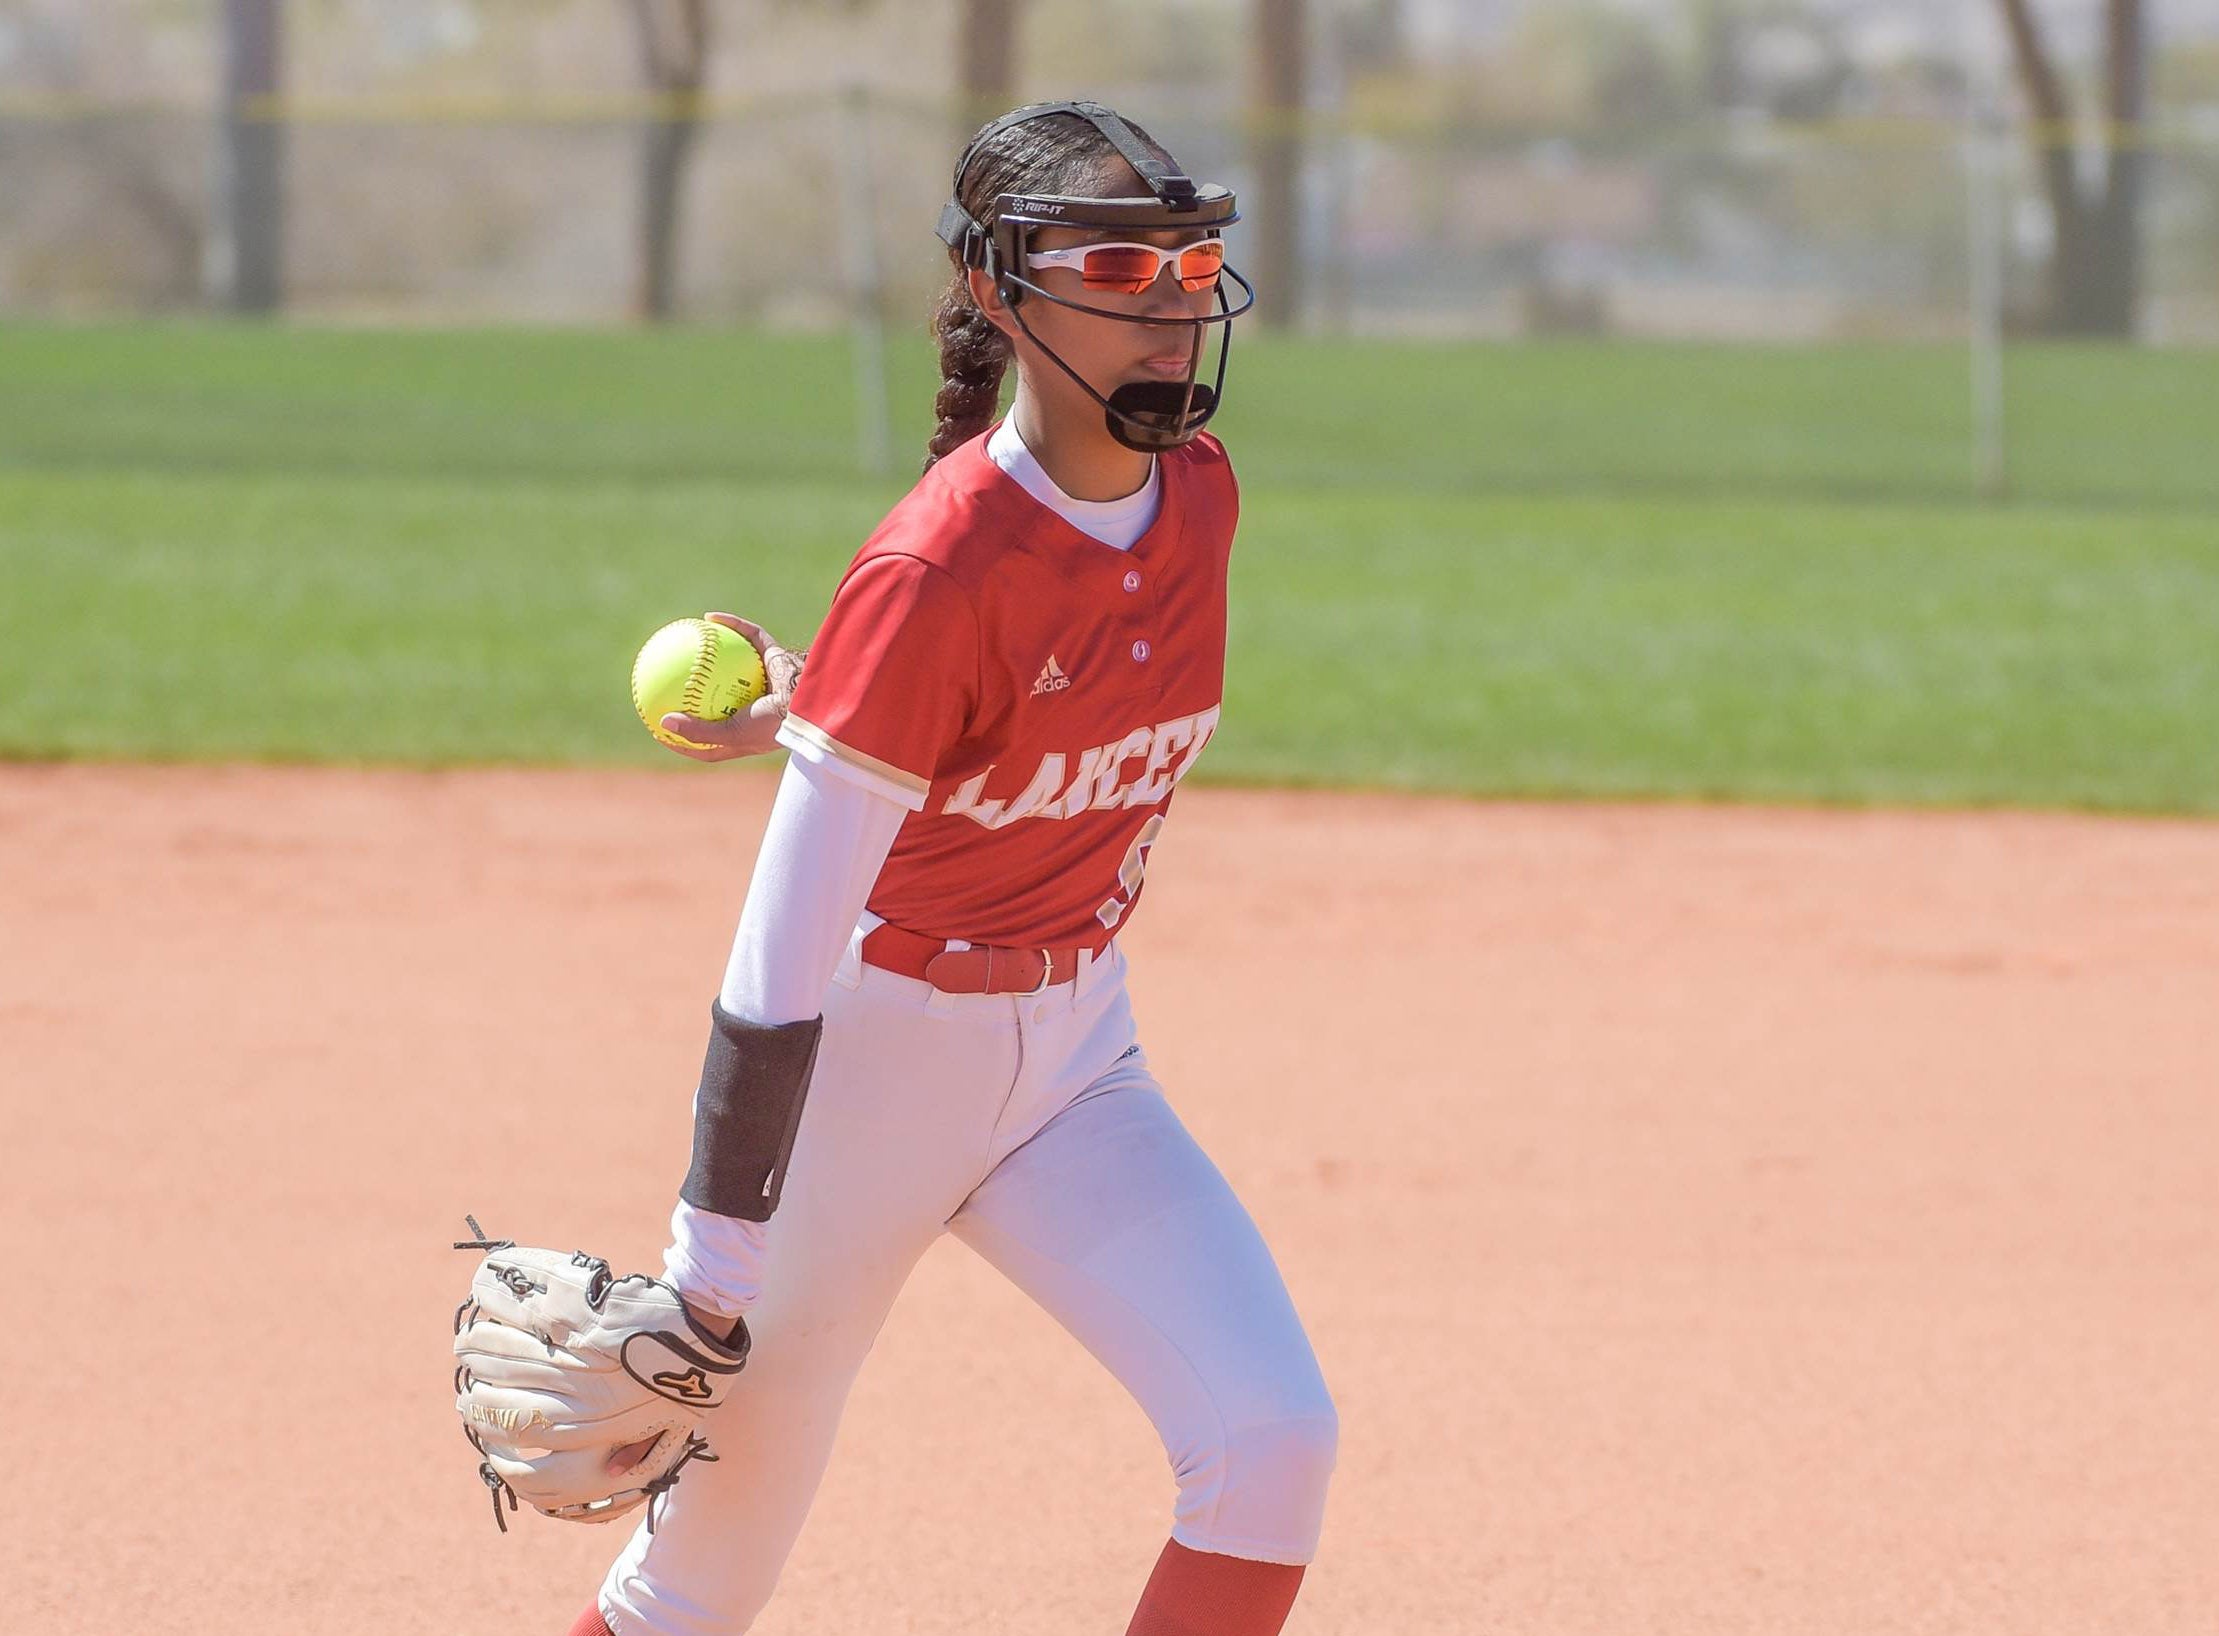 Brianne Weiss of Orange Lutheran has helped the Lancers climb back into the MaxPreps Top 25 softball rankings. The Notre Dame commit is 6-1 with an 0.80 ERA. (Photo: Darin Sicurello)